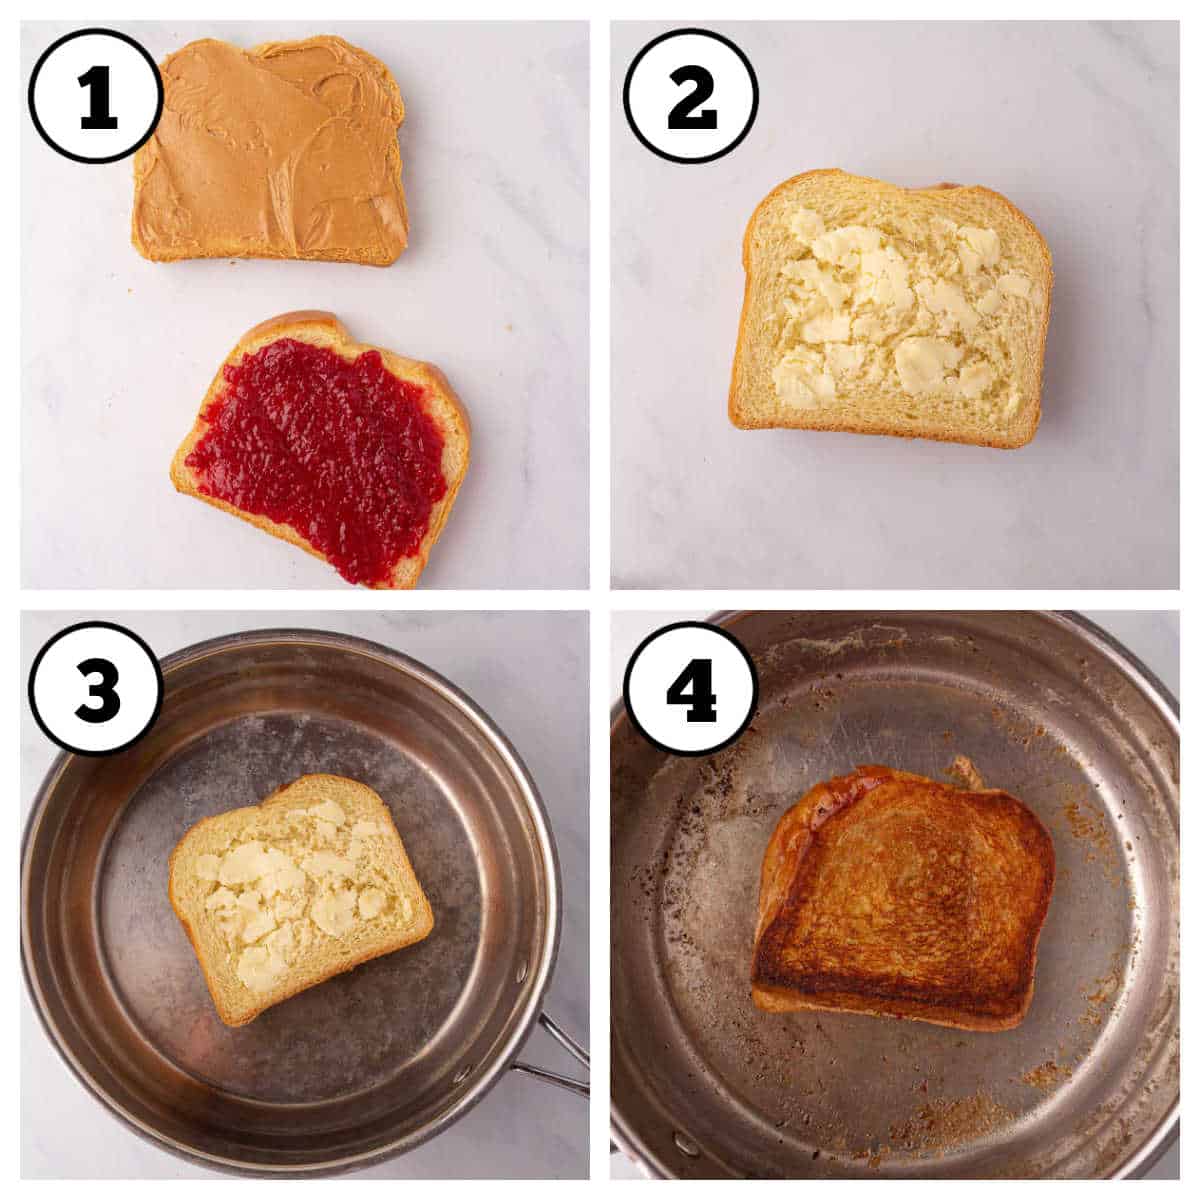 Steps 1-4 image collage of how to make a friend peanut butter and jelly.